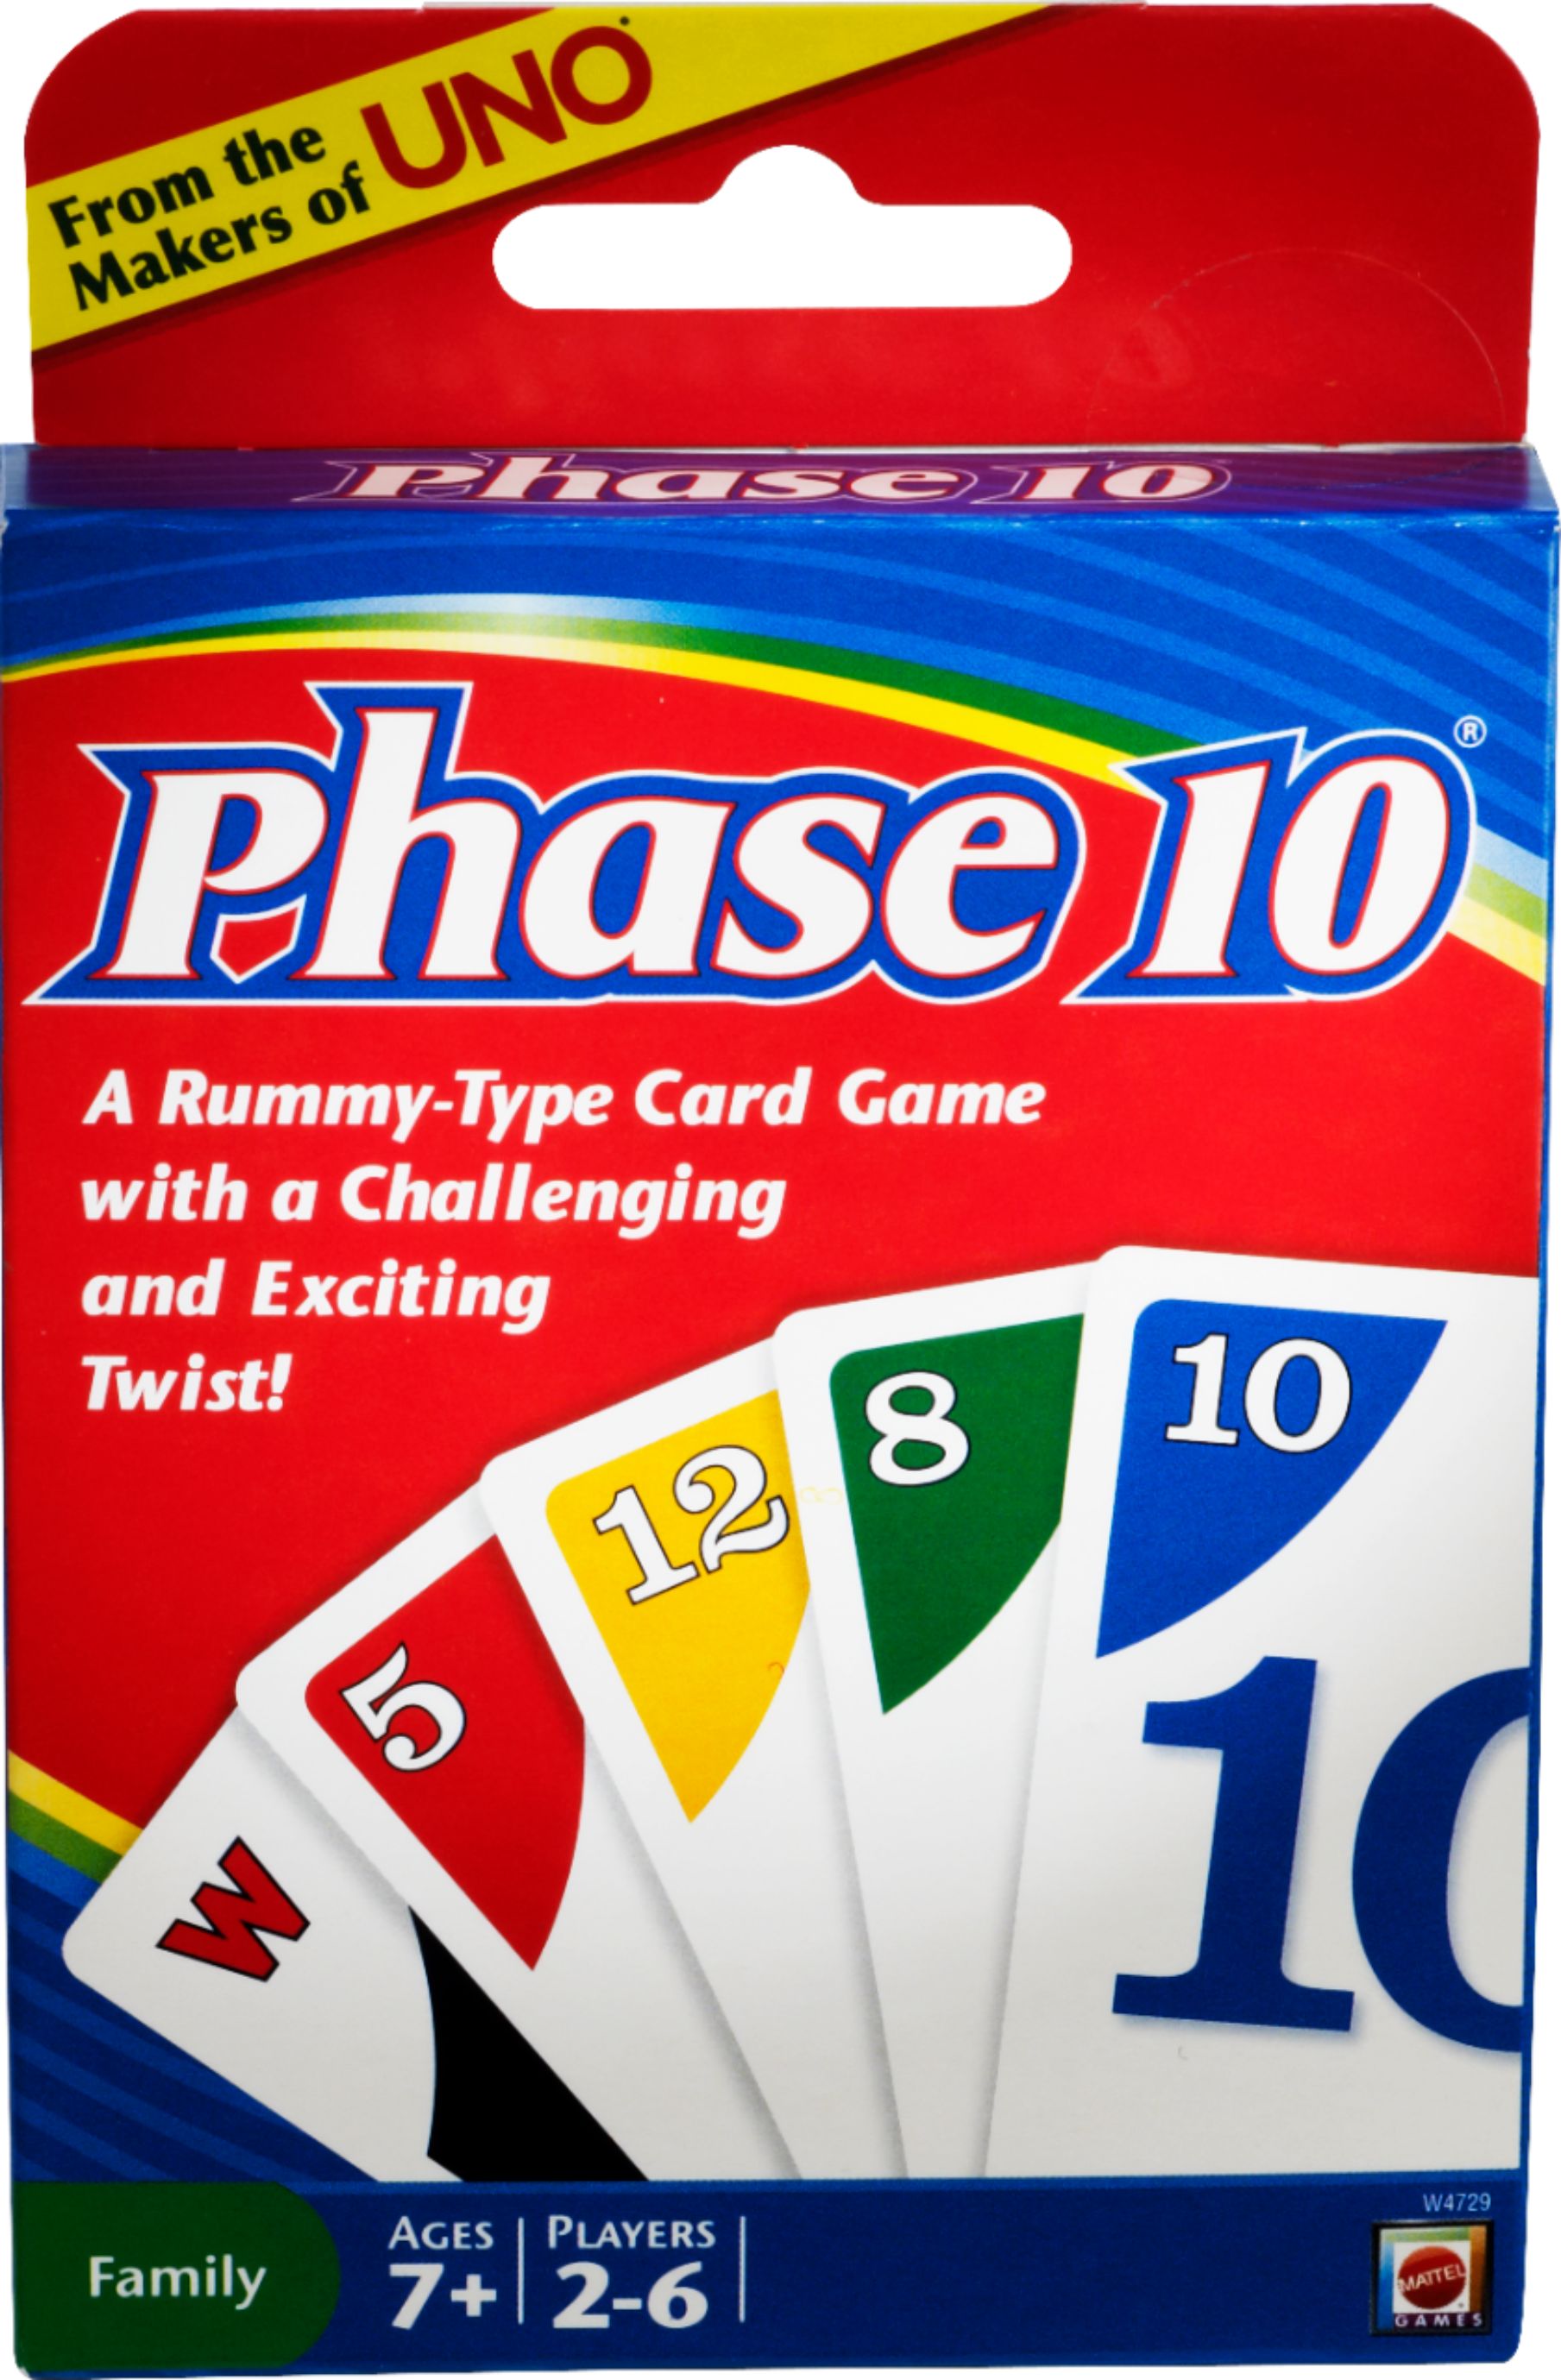 W4729 for sale online Mattel Phase 10 Card Game 